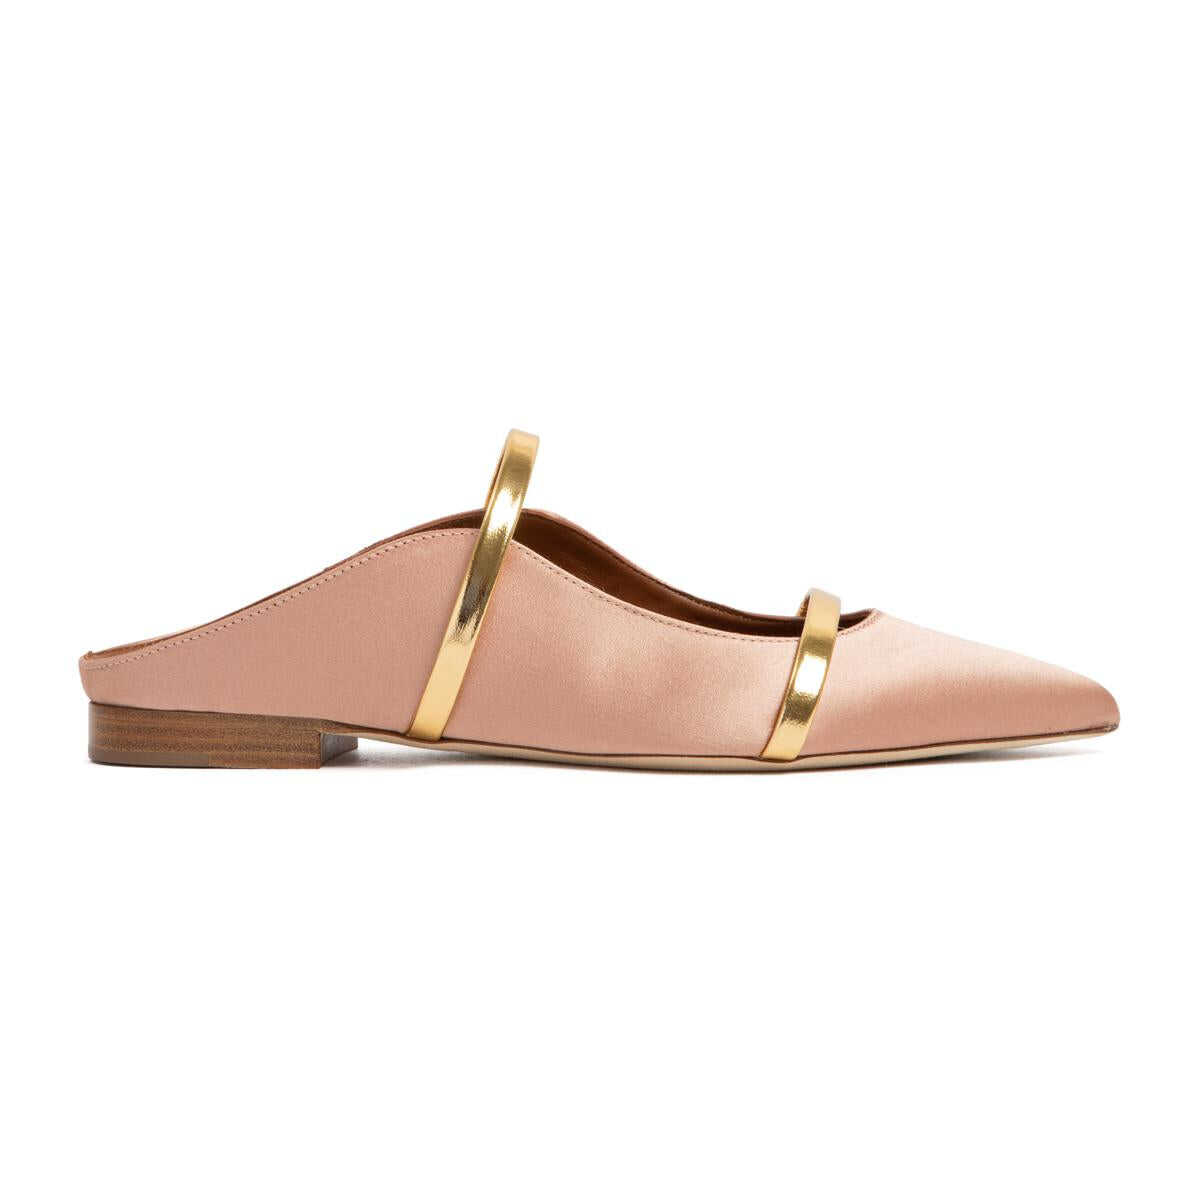 MALONE SOULIERS MALONE SOULIERS MAUREEN FLAT SHOES NUDE & NEUTRALS